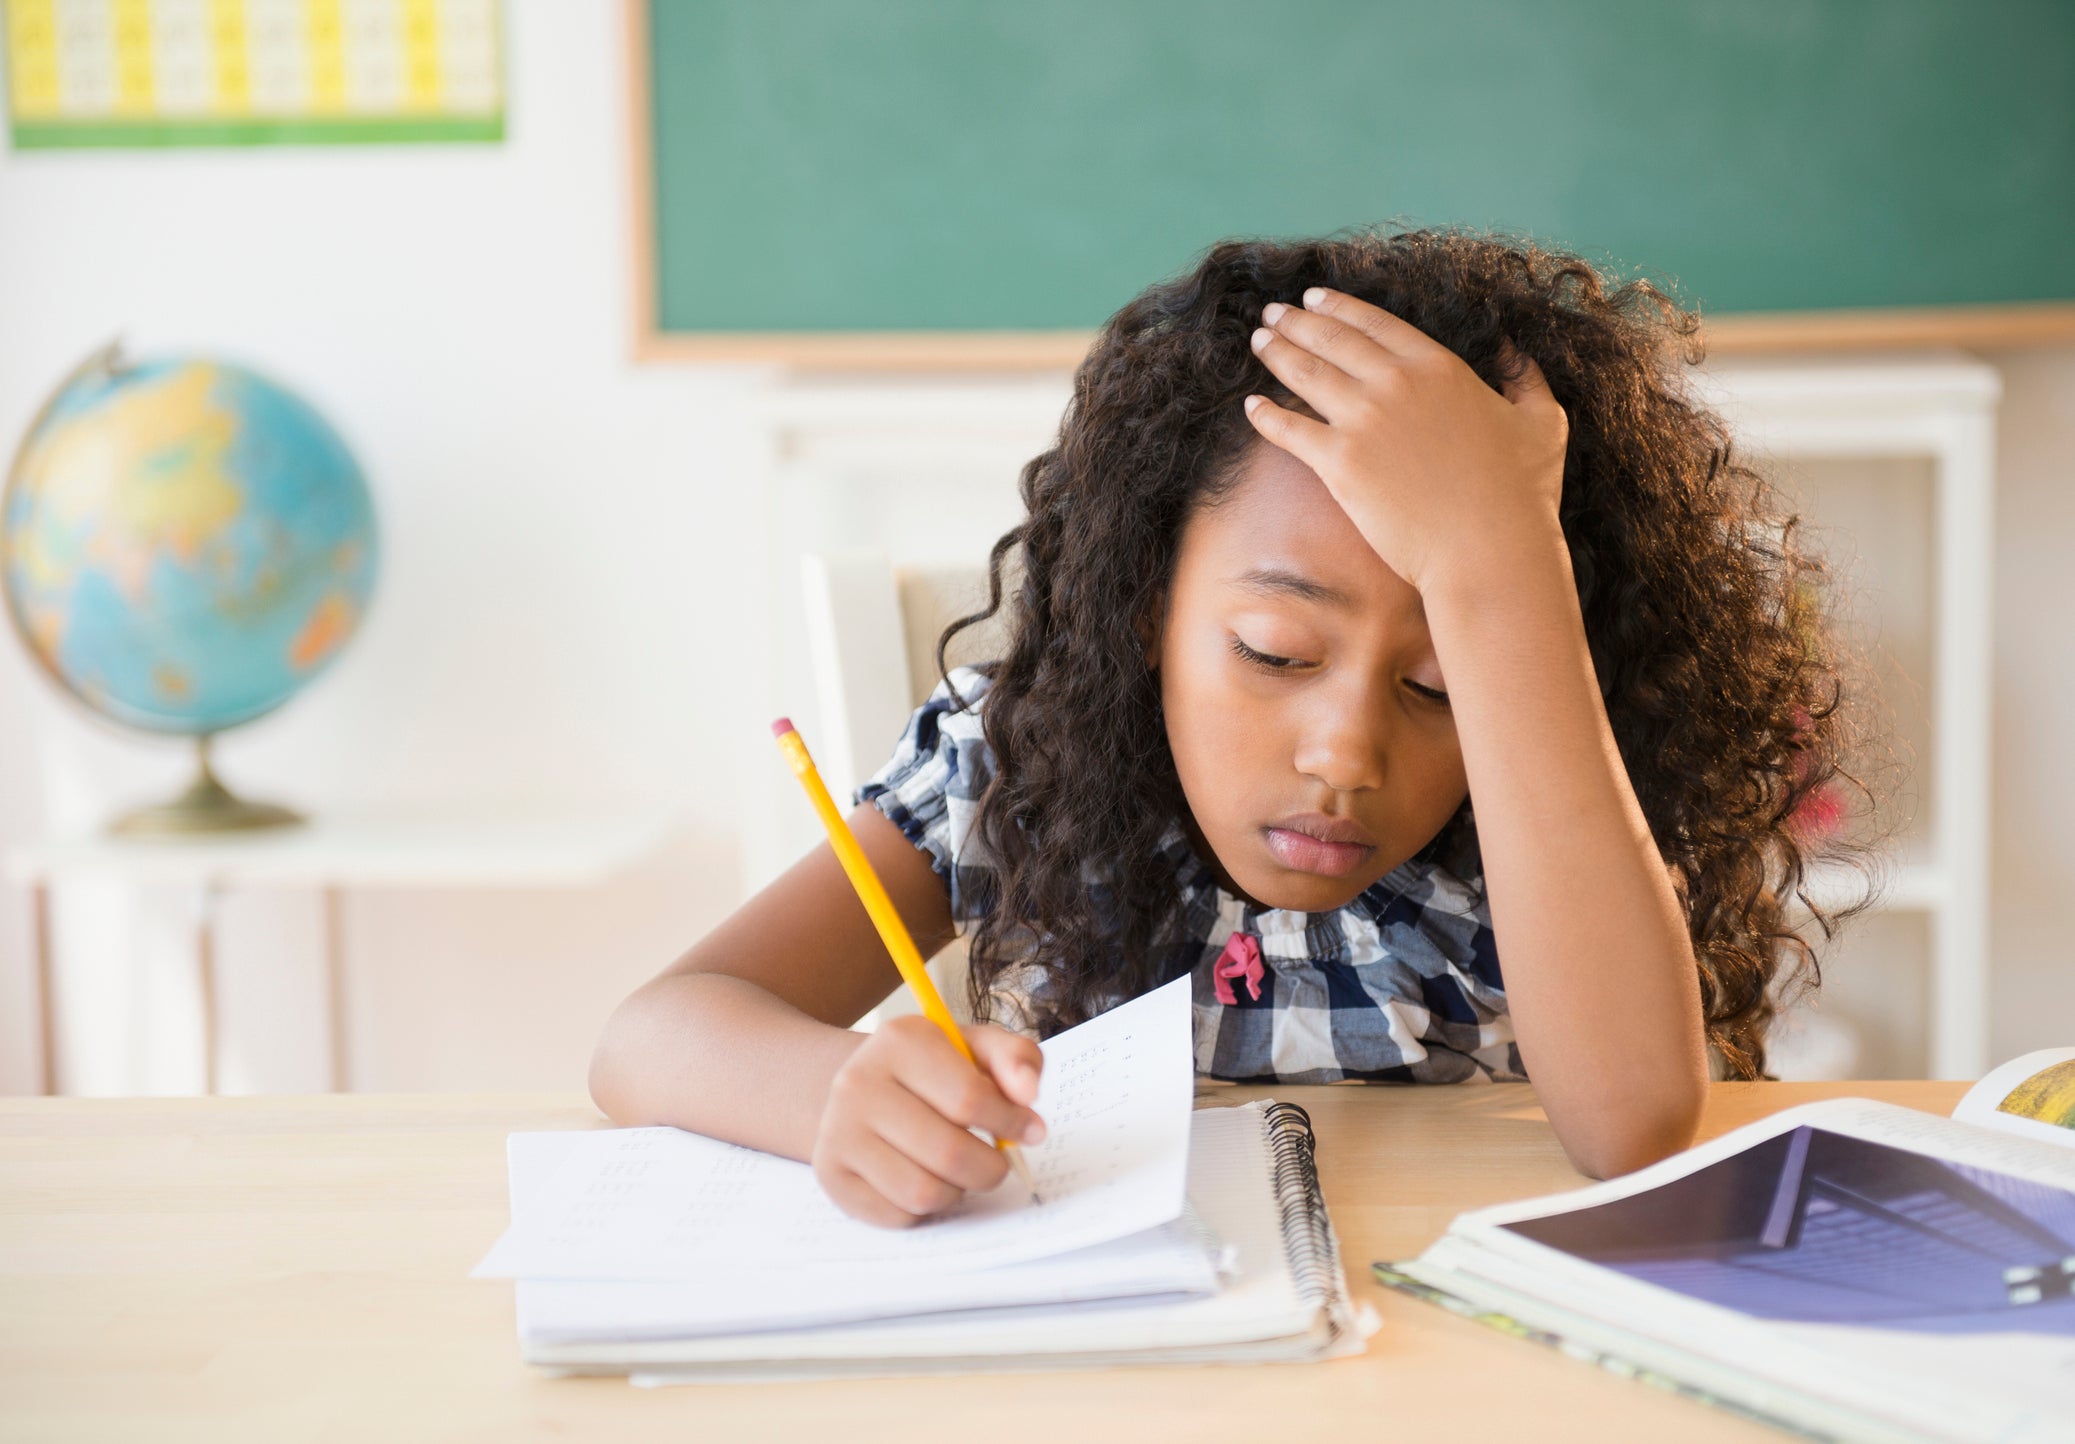 Report: Kids May Be Just As Stressed As Their Overworked Parents